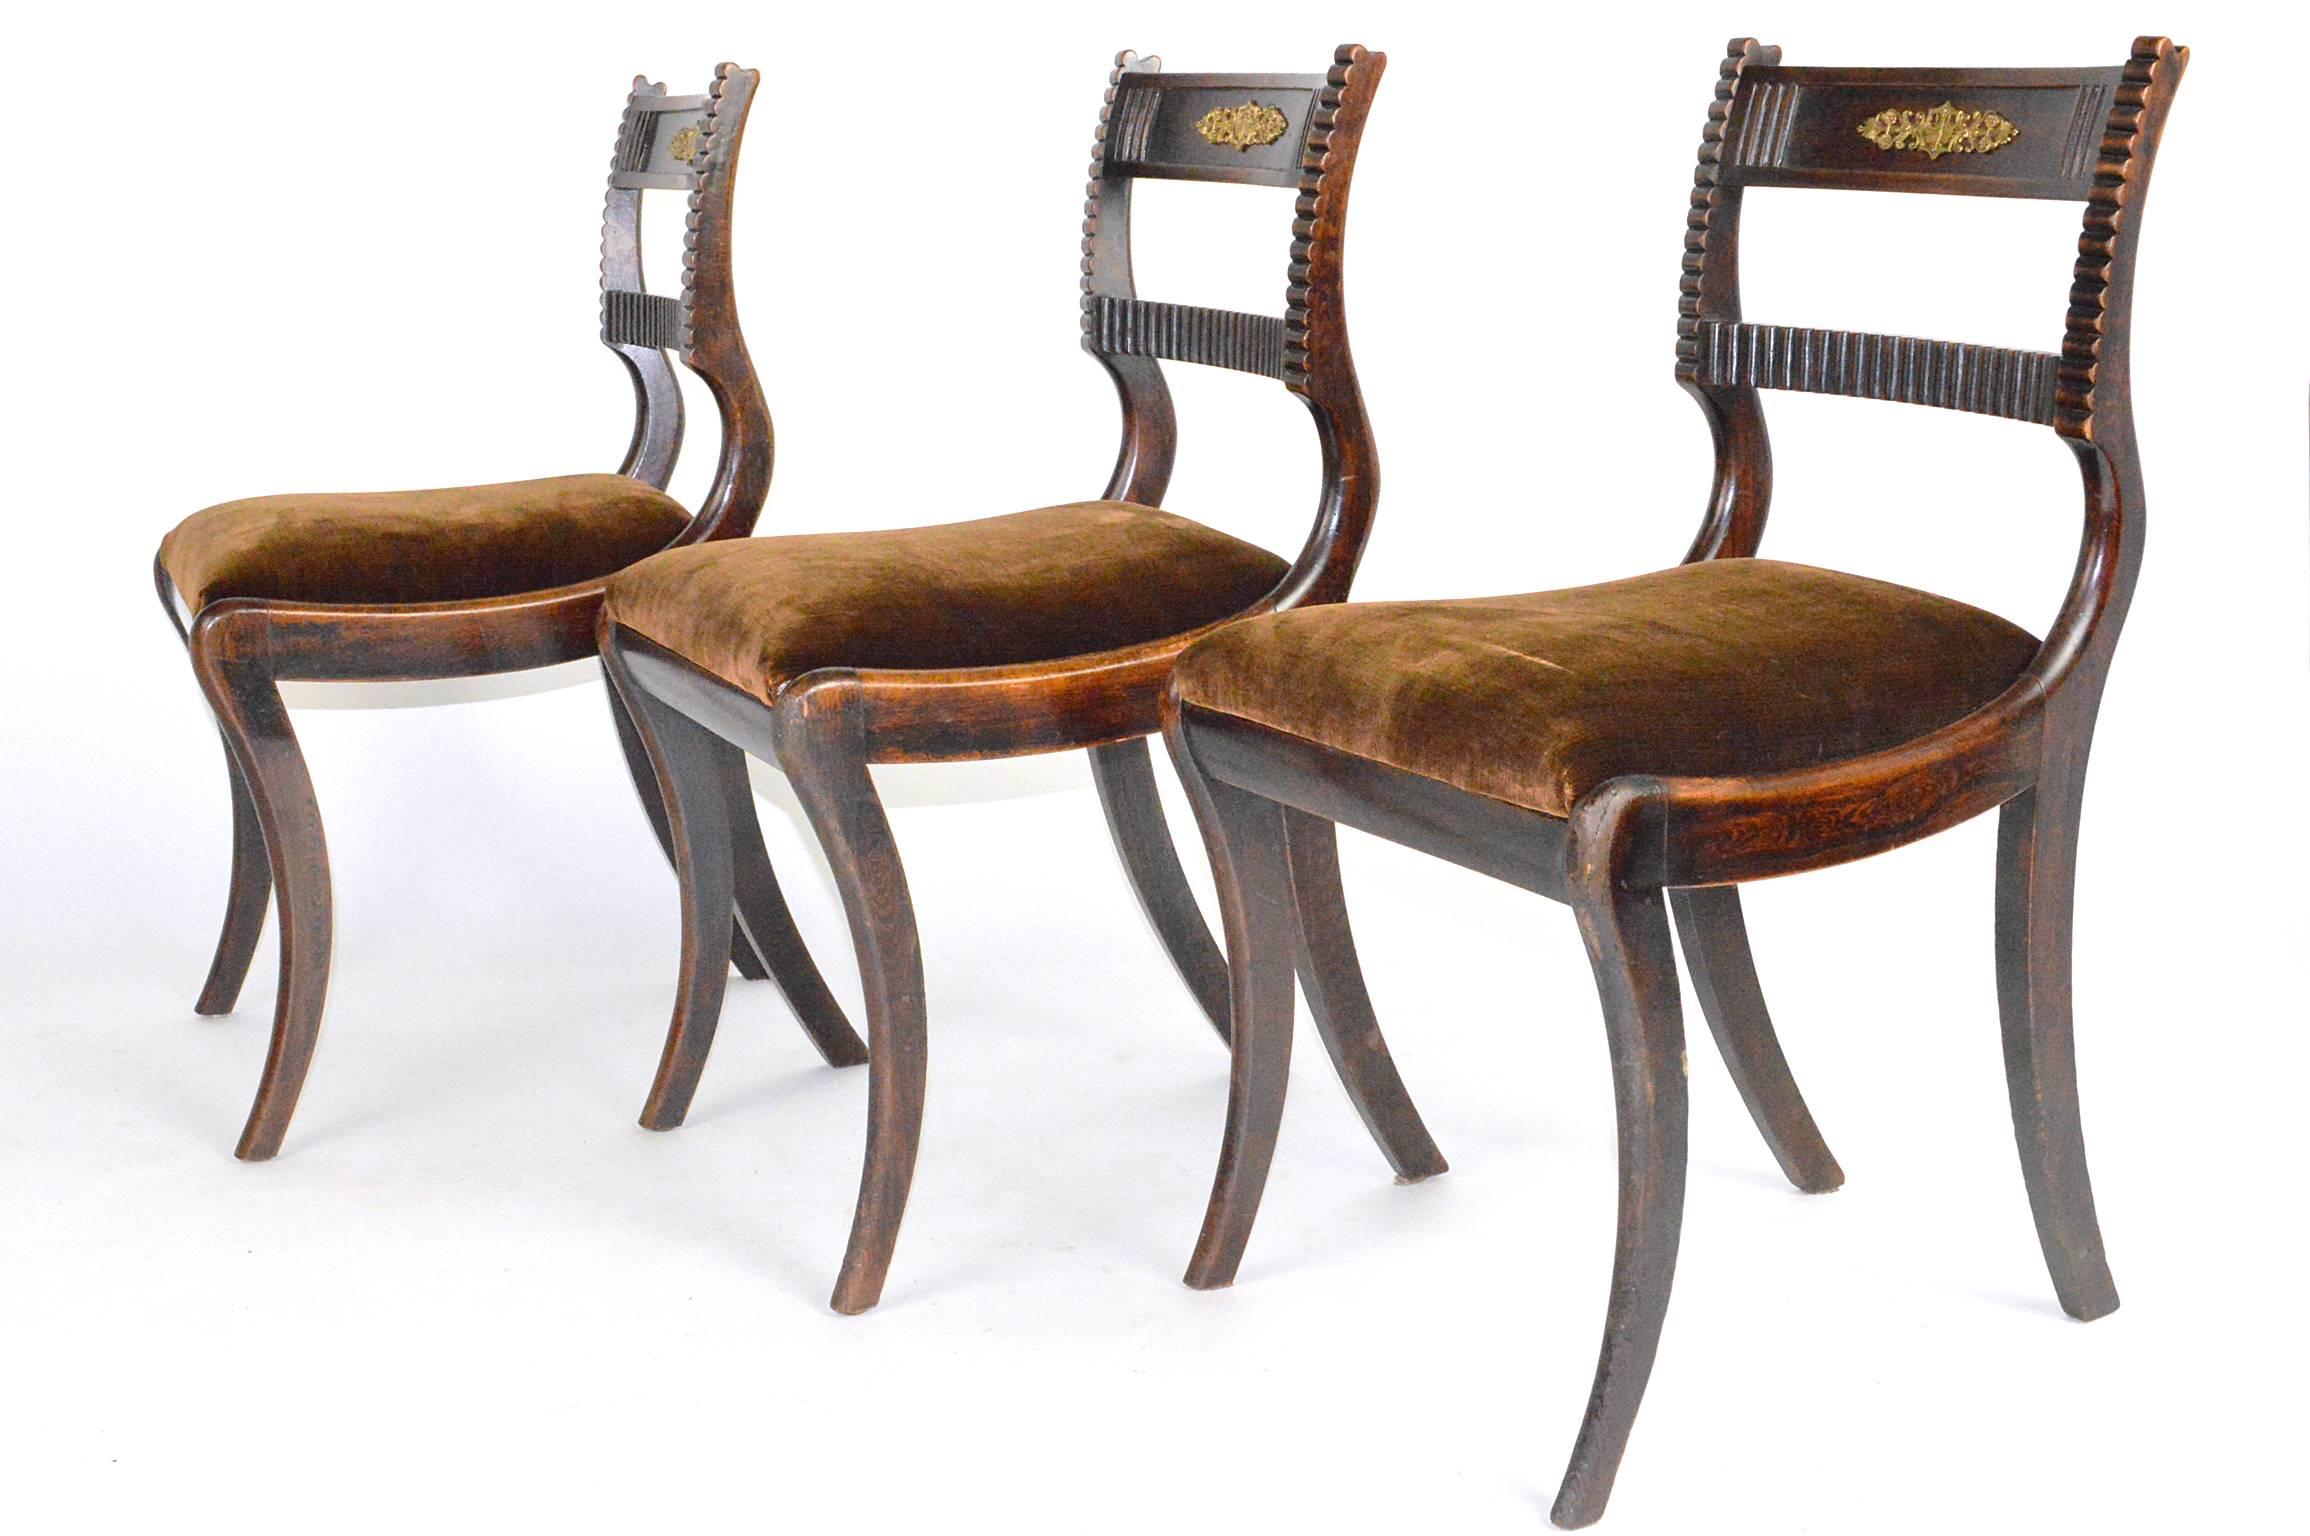 Set of six English Regency style mahogany side chairs with slip seat and saber legs. Each with a curved side rail and fluted center rail. With a center gilt bronze butterfly mount.